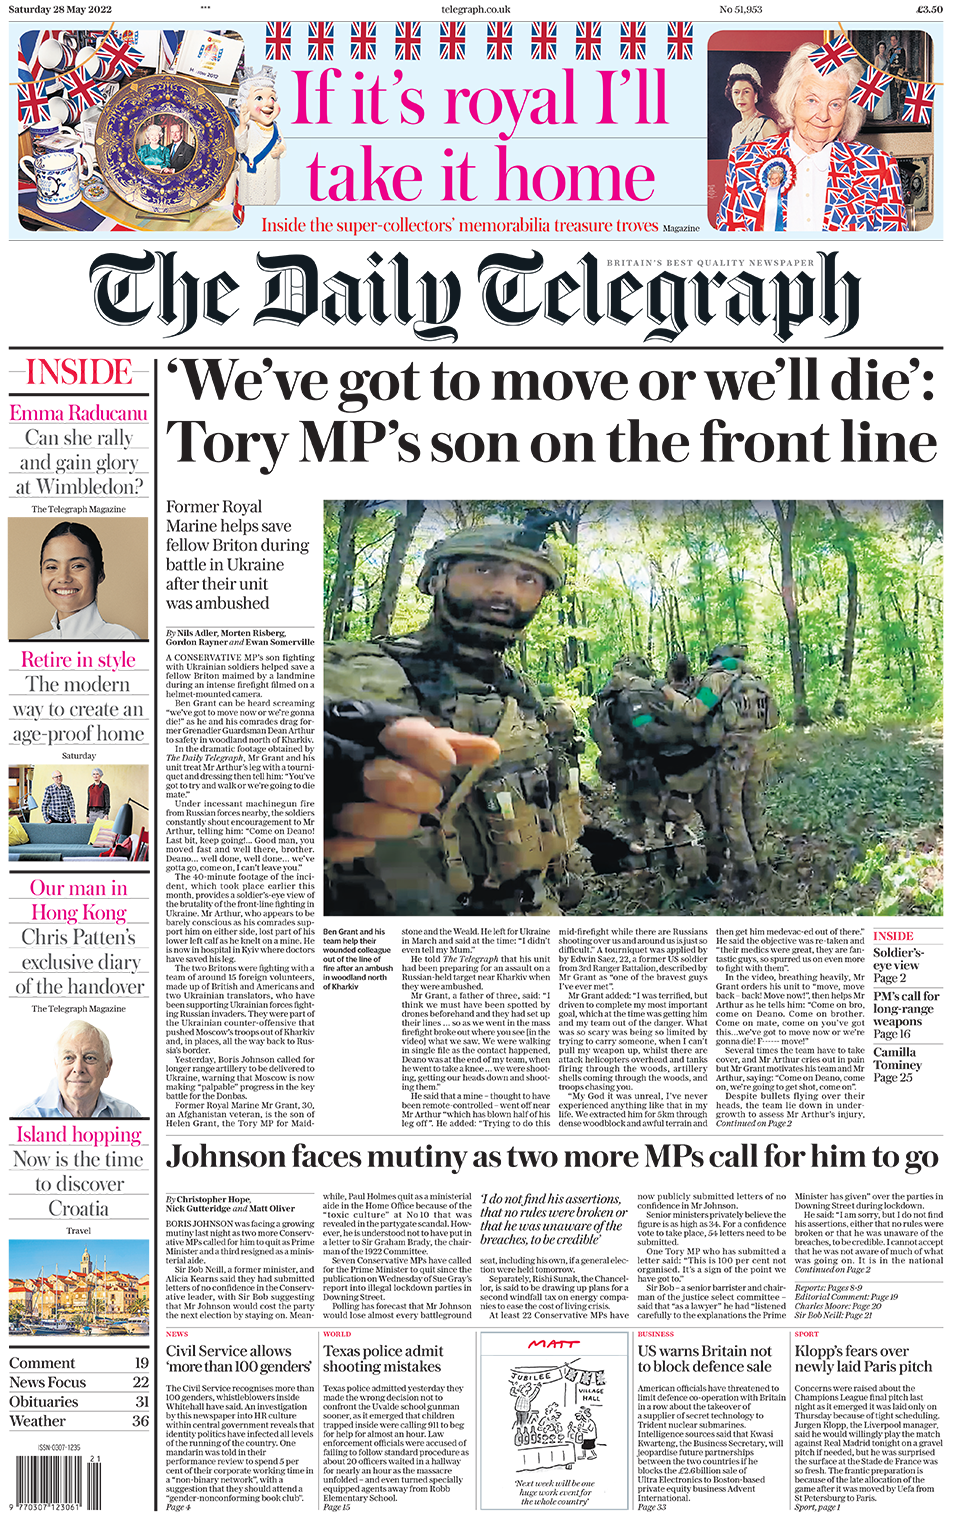 The headline in the Telegraph reads: "'We've got to move or we'll die': Tory MP's son on the front line".